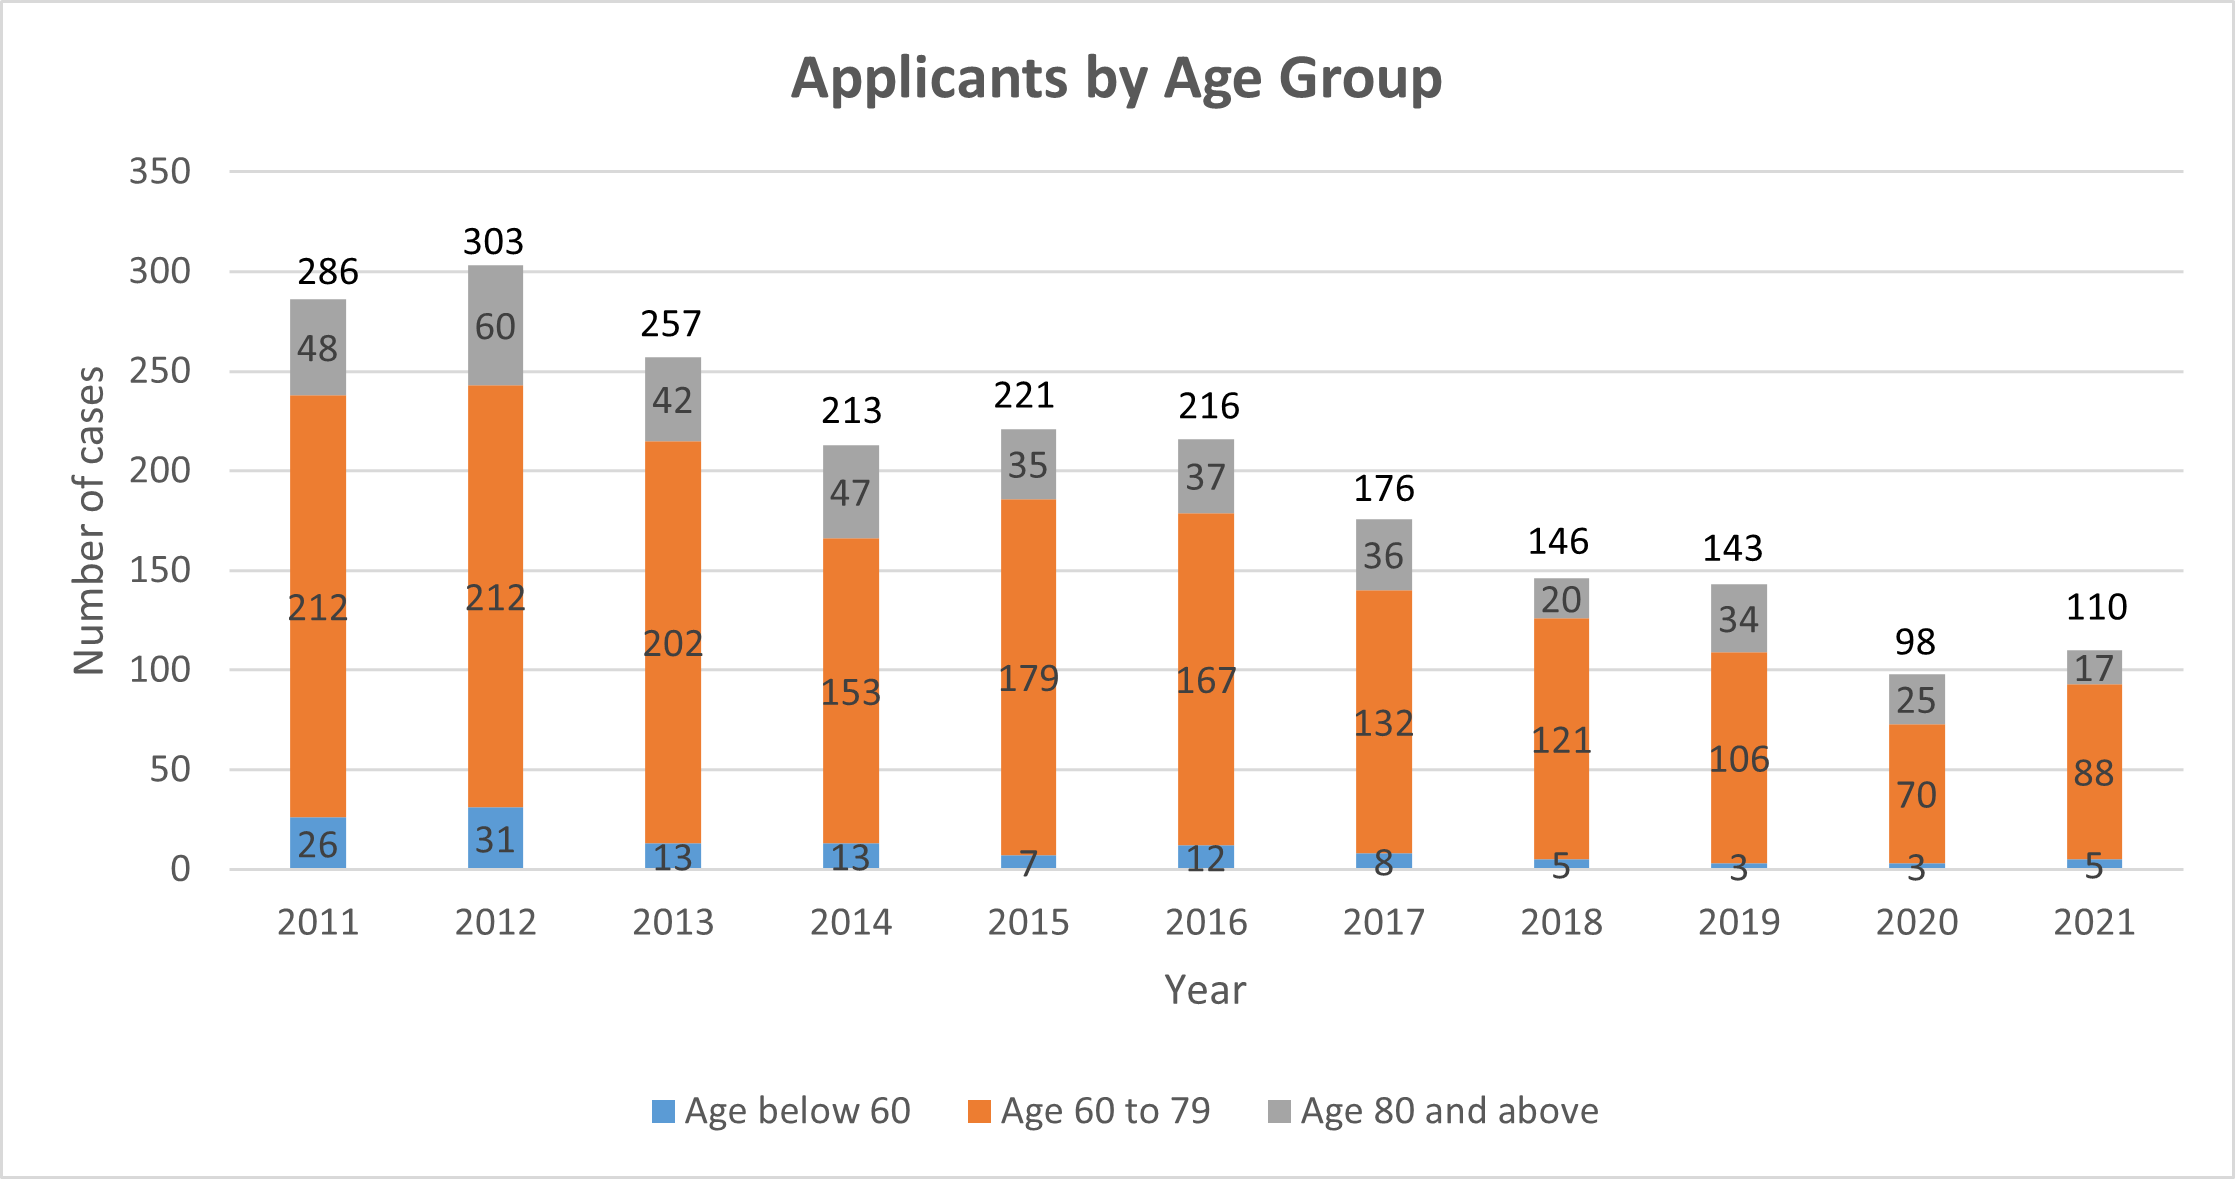 Cases by Age Group 2021